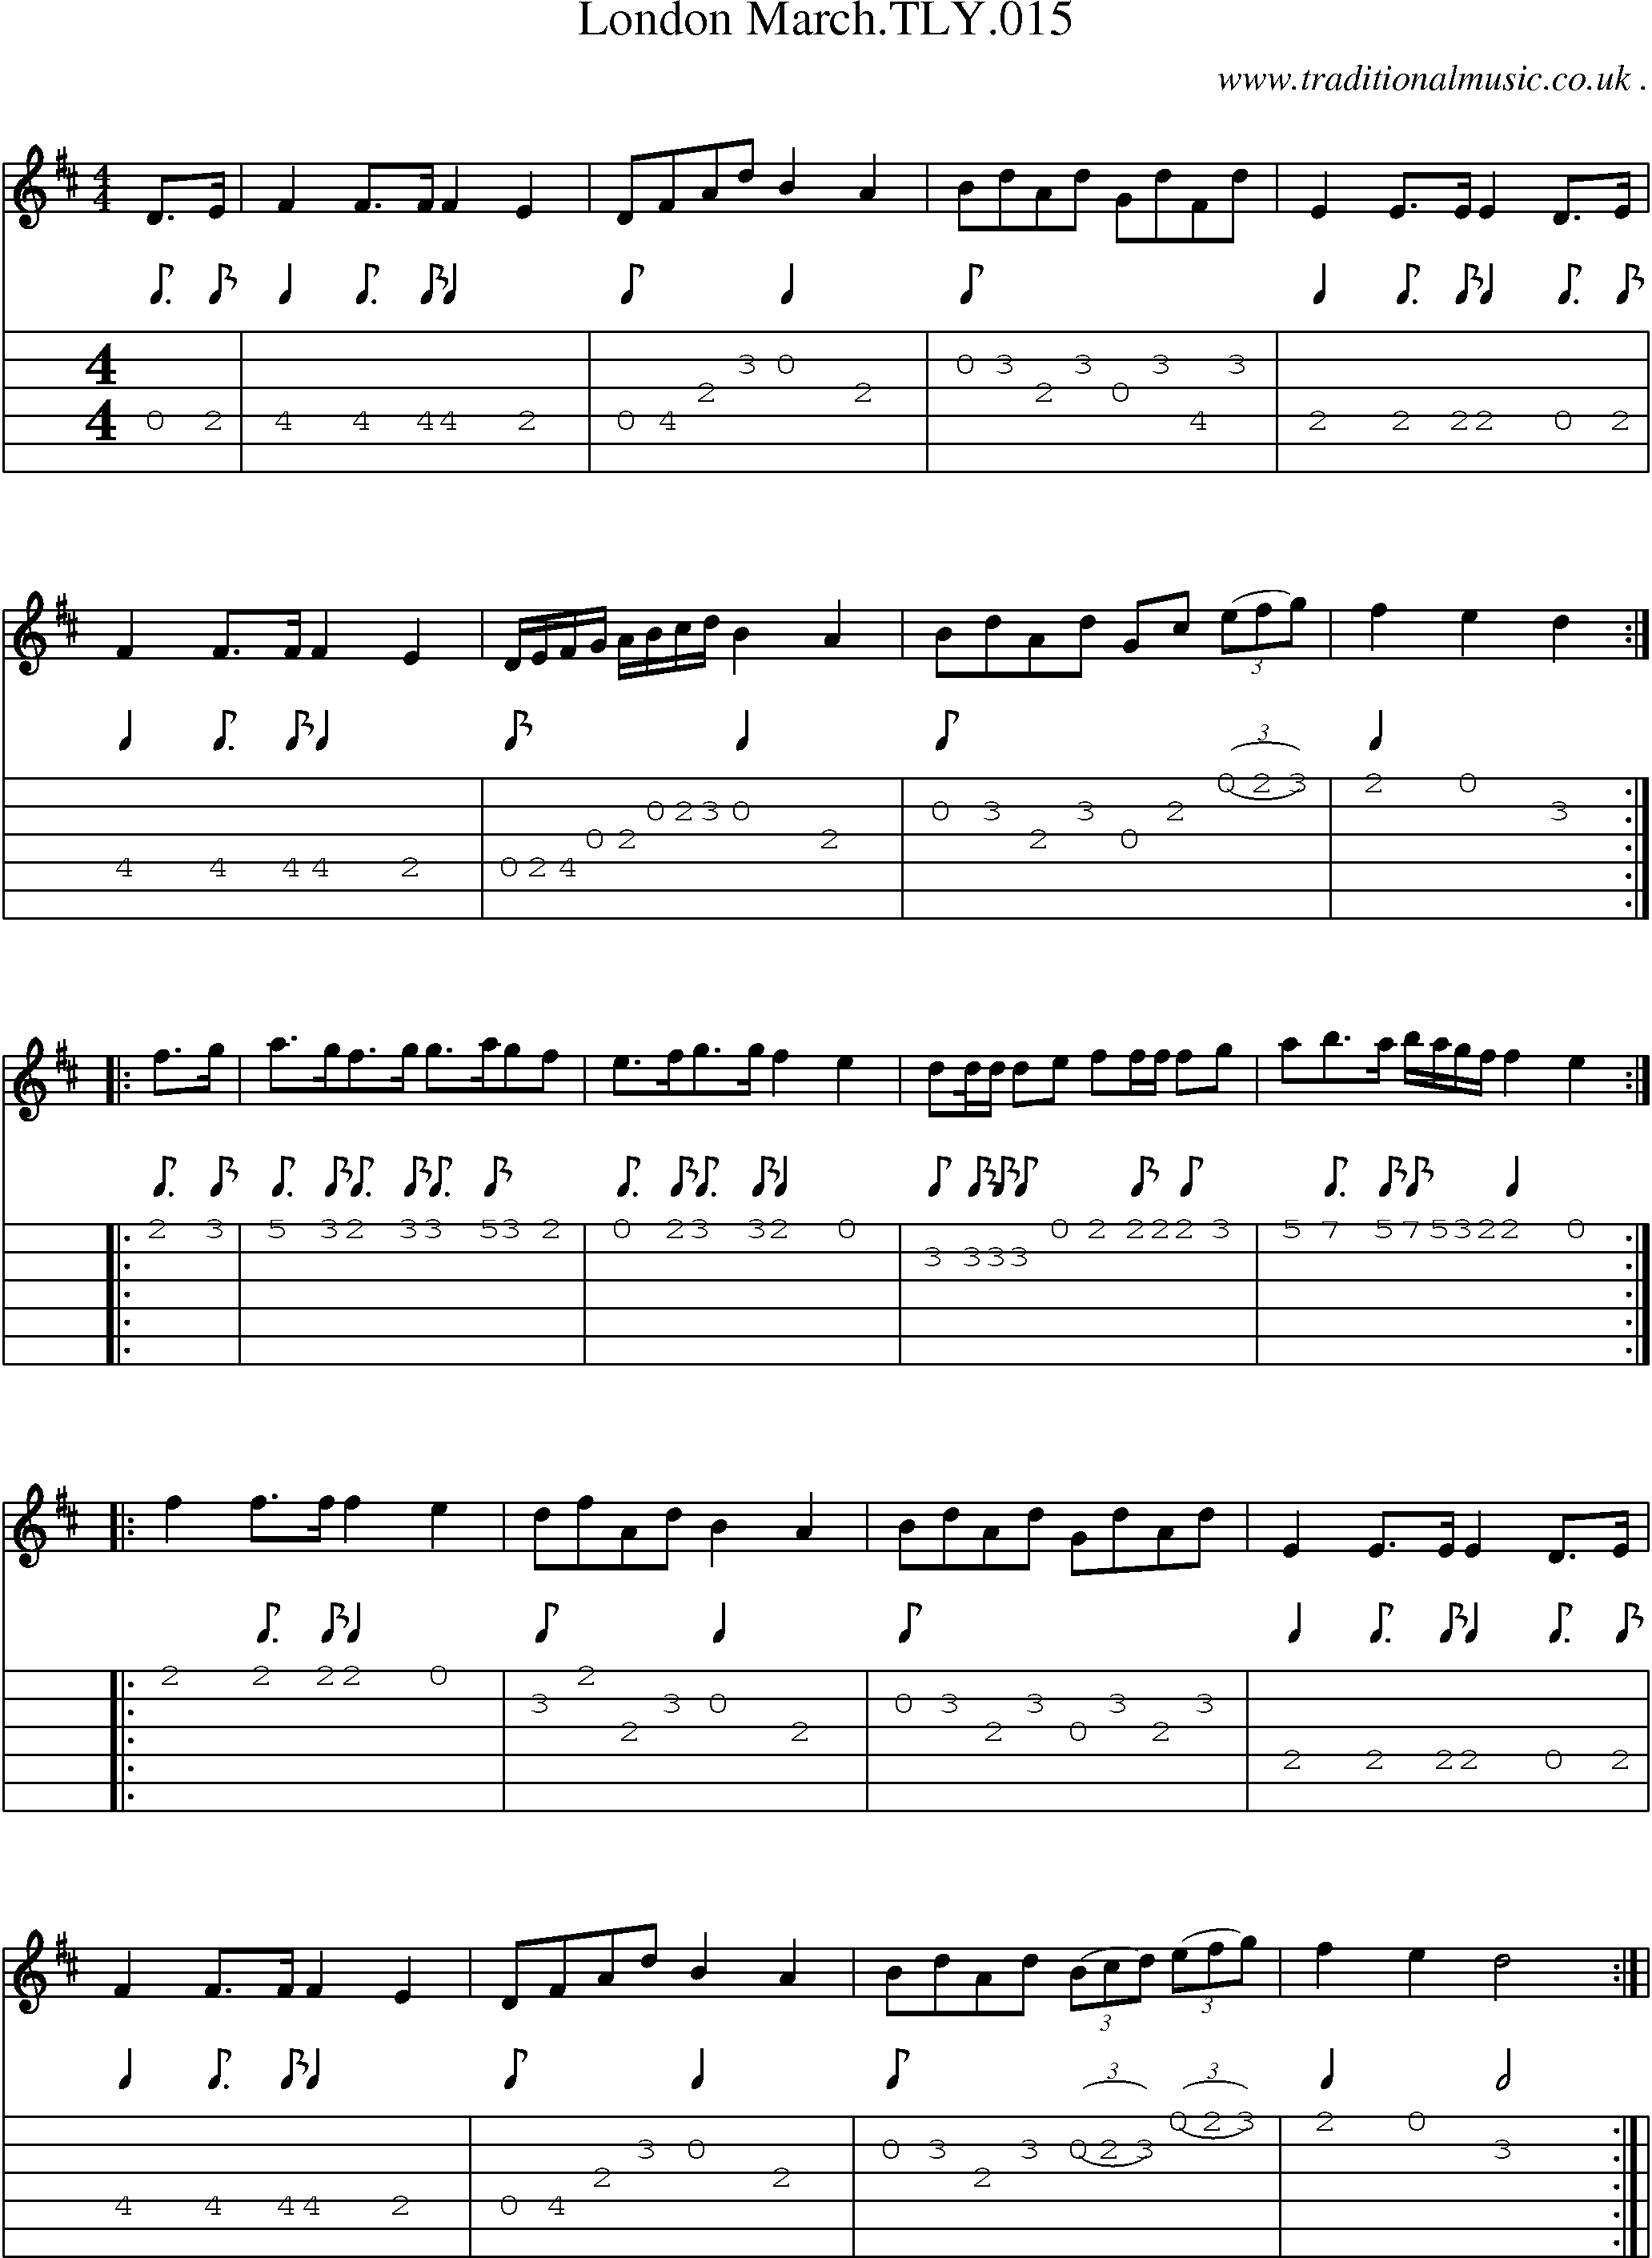 Sheet-Music and Guitar Tabs for London Marchtly015